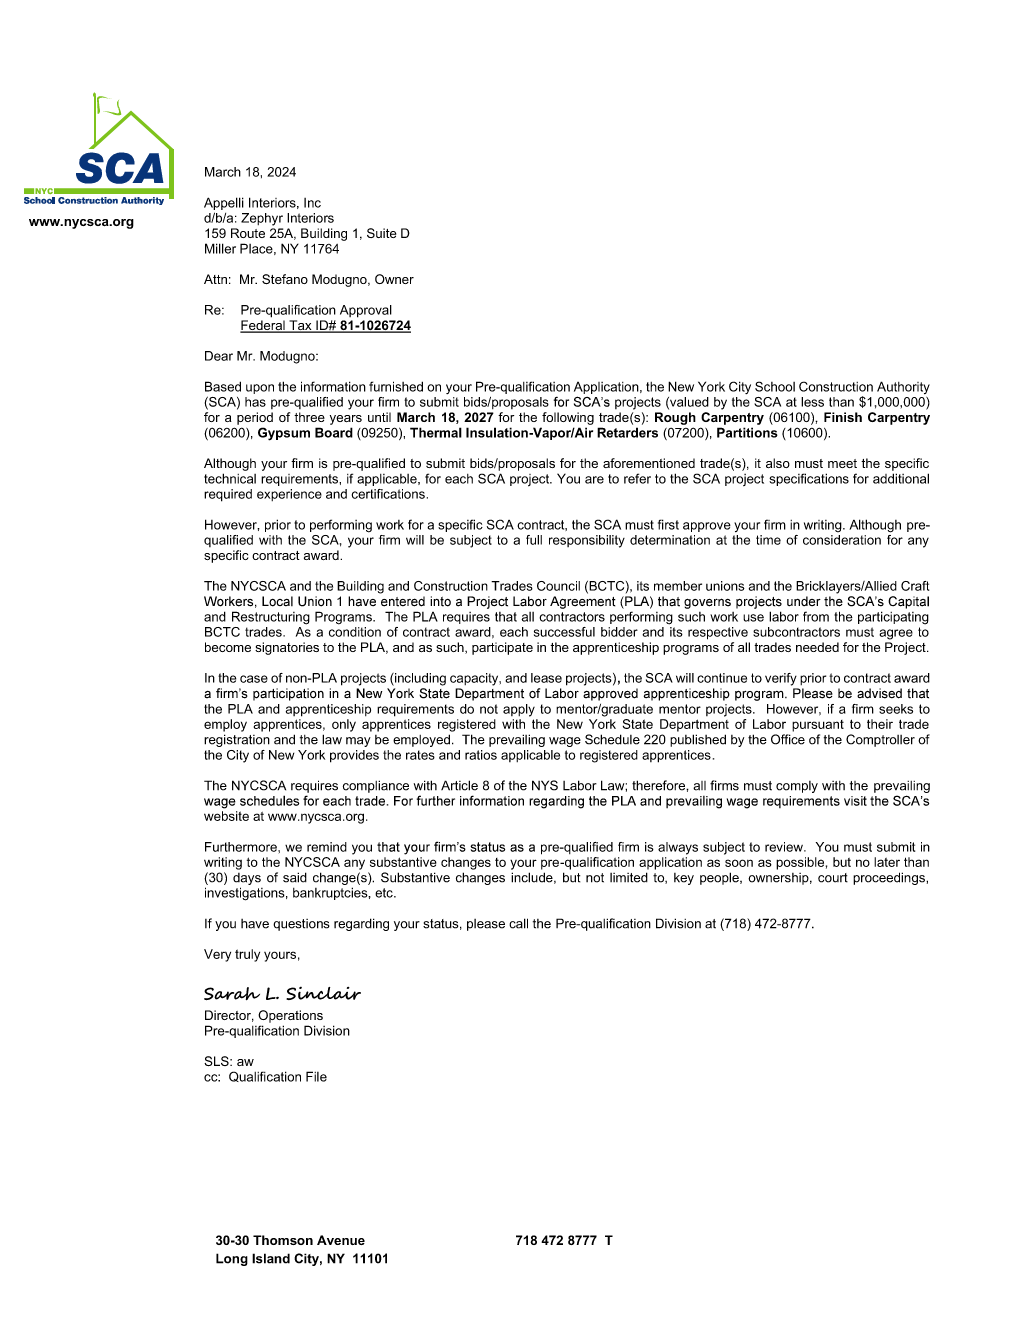 Appelli Interior Approval Letter SCA.png